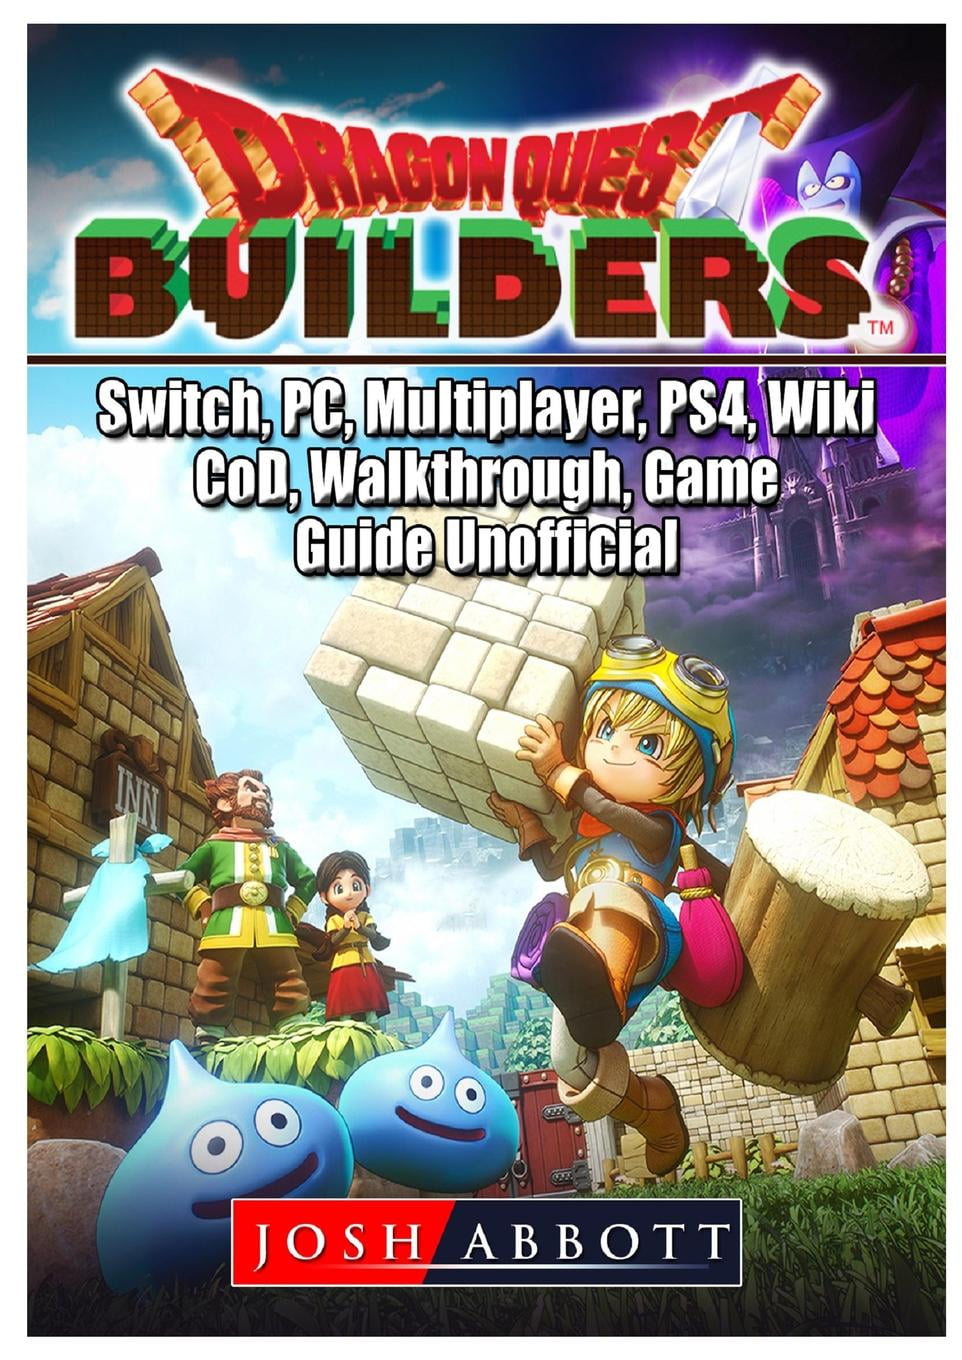 Dragon Quest Builders Switch Pc Multiplayer Ps4 Wiki Cod